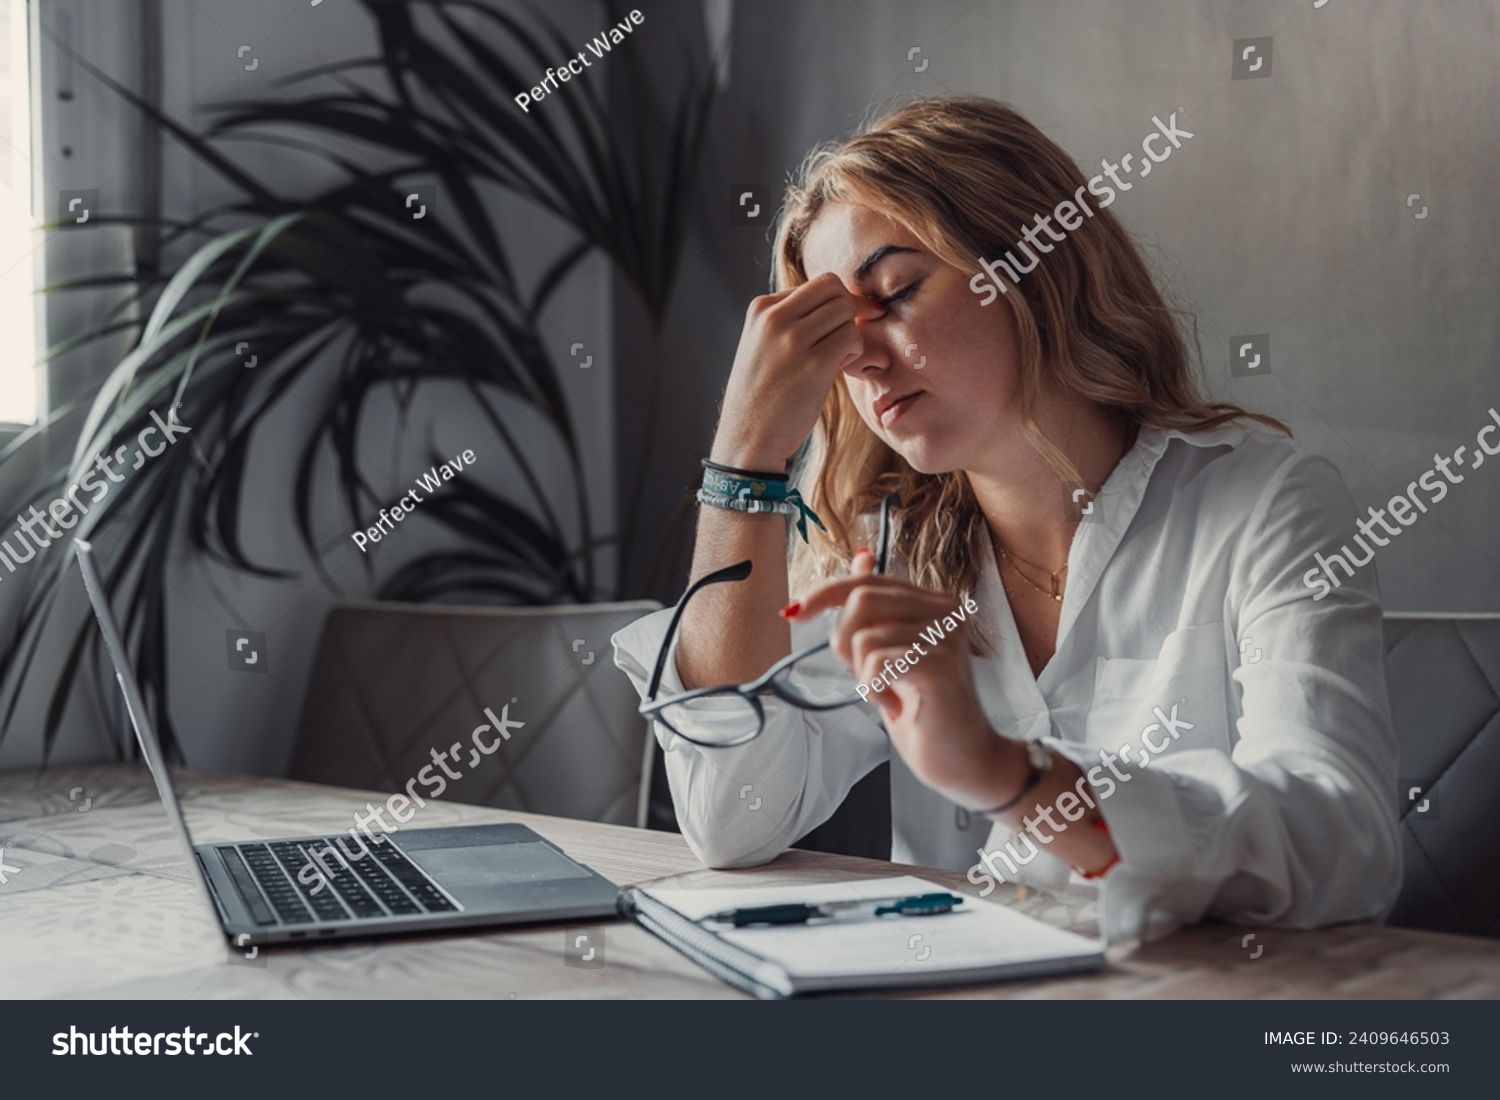 Stressed tired woman in pain having strong terrible headache attack after computer laptop study, fatigued exhausted girl suffering from chronic migraine massaging temples to relieve head ache tension #2409646503